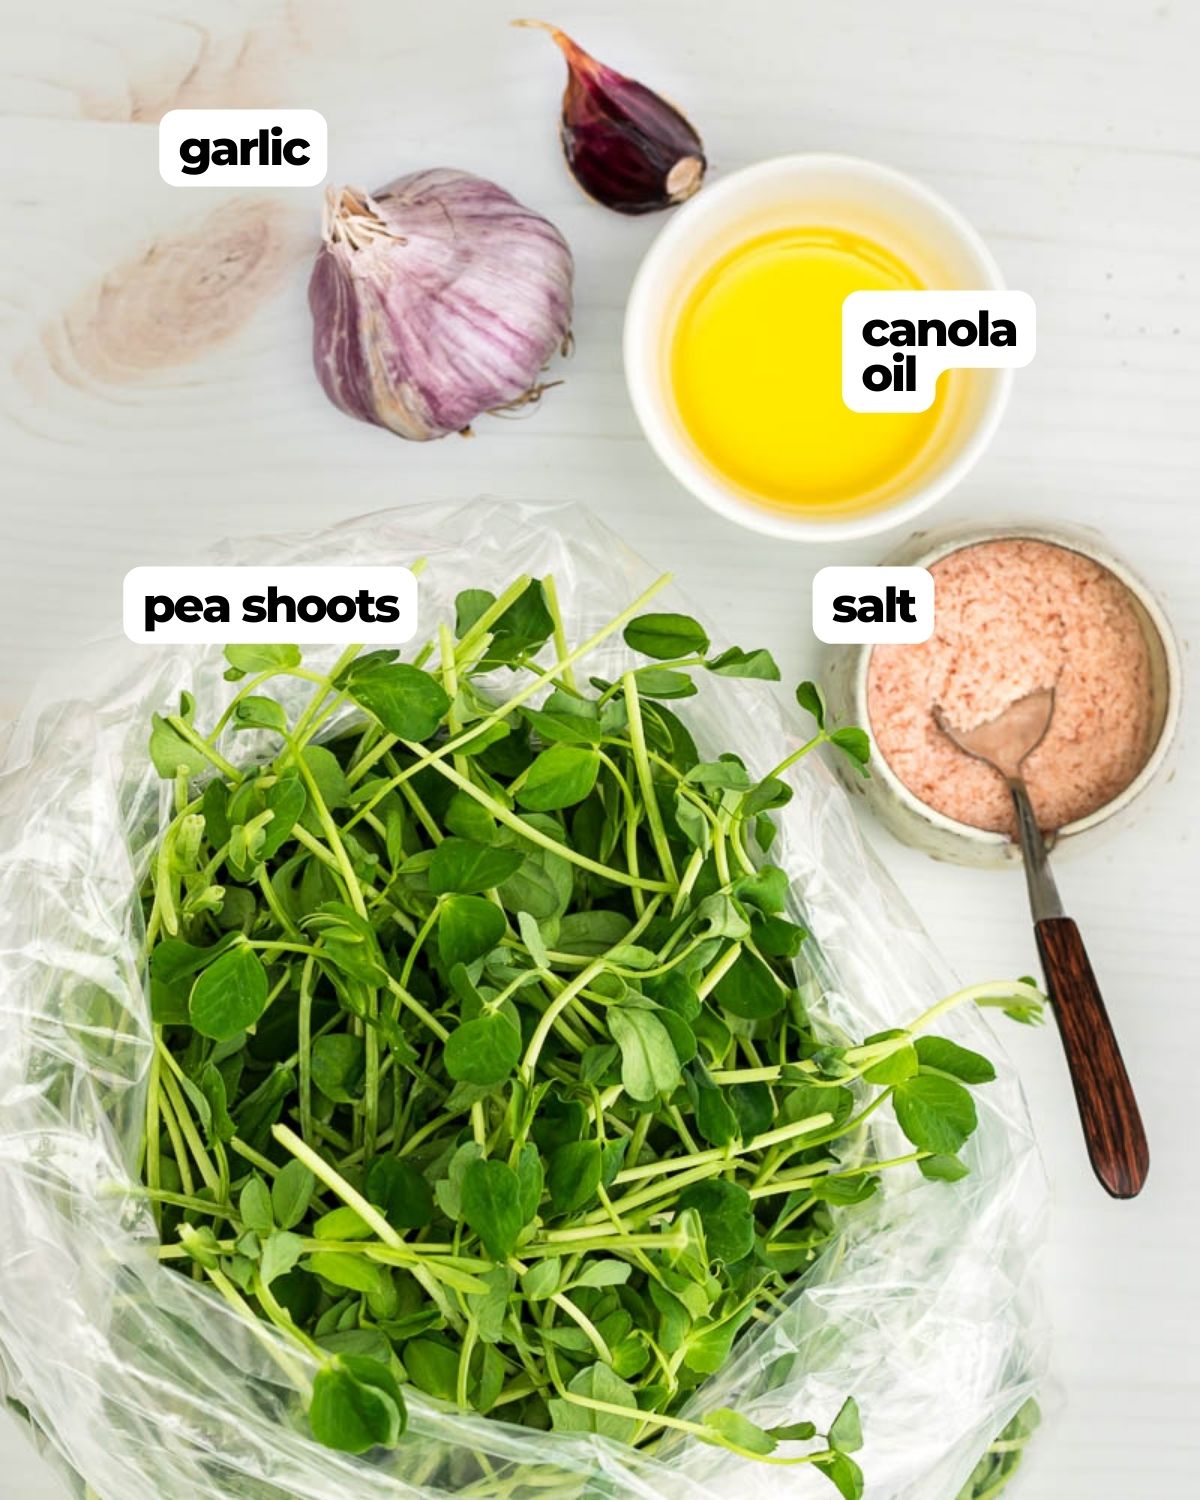 Pea shoots with garlic labeled ingredients